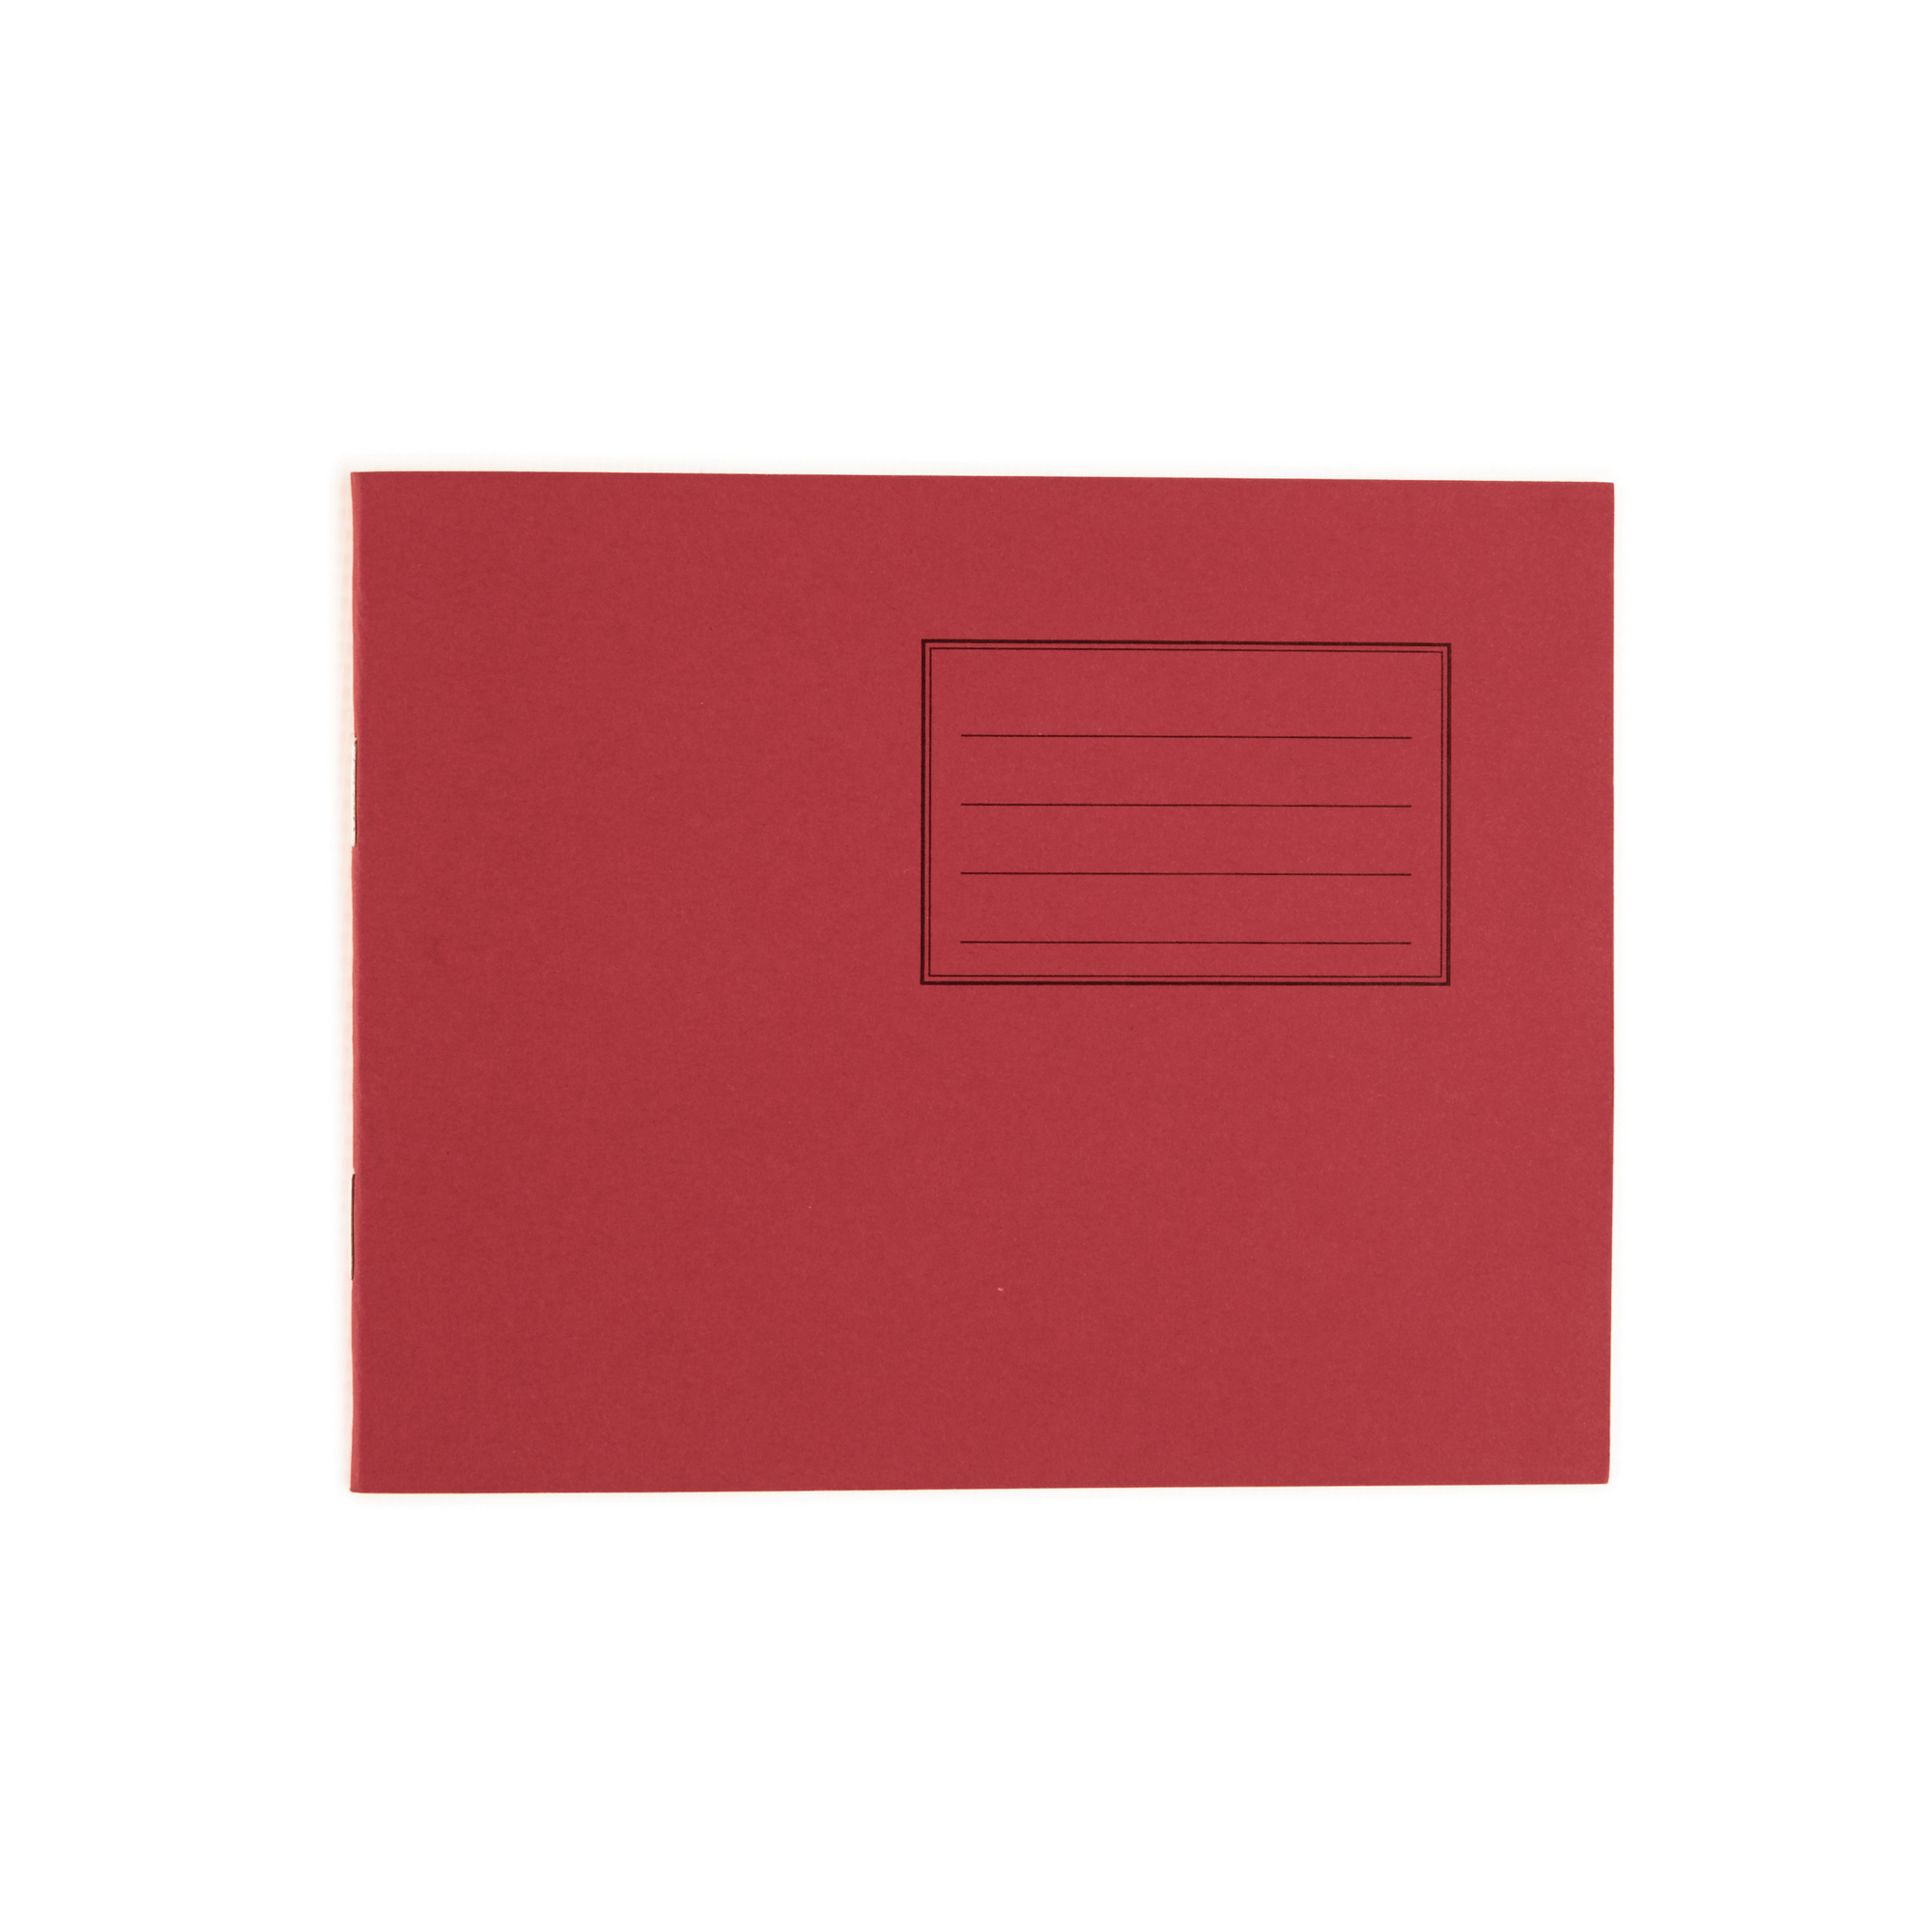 135x165mm10mm Sq 24pg Red P100